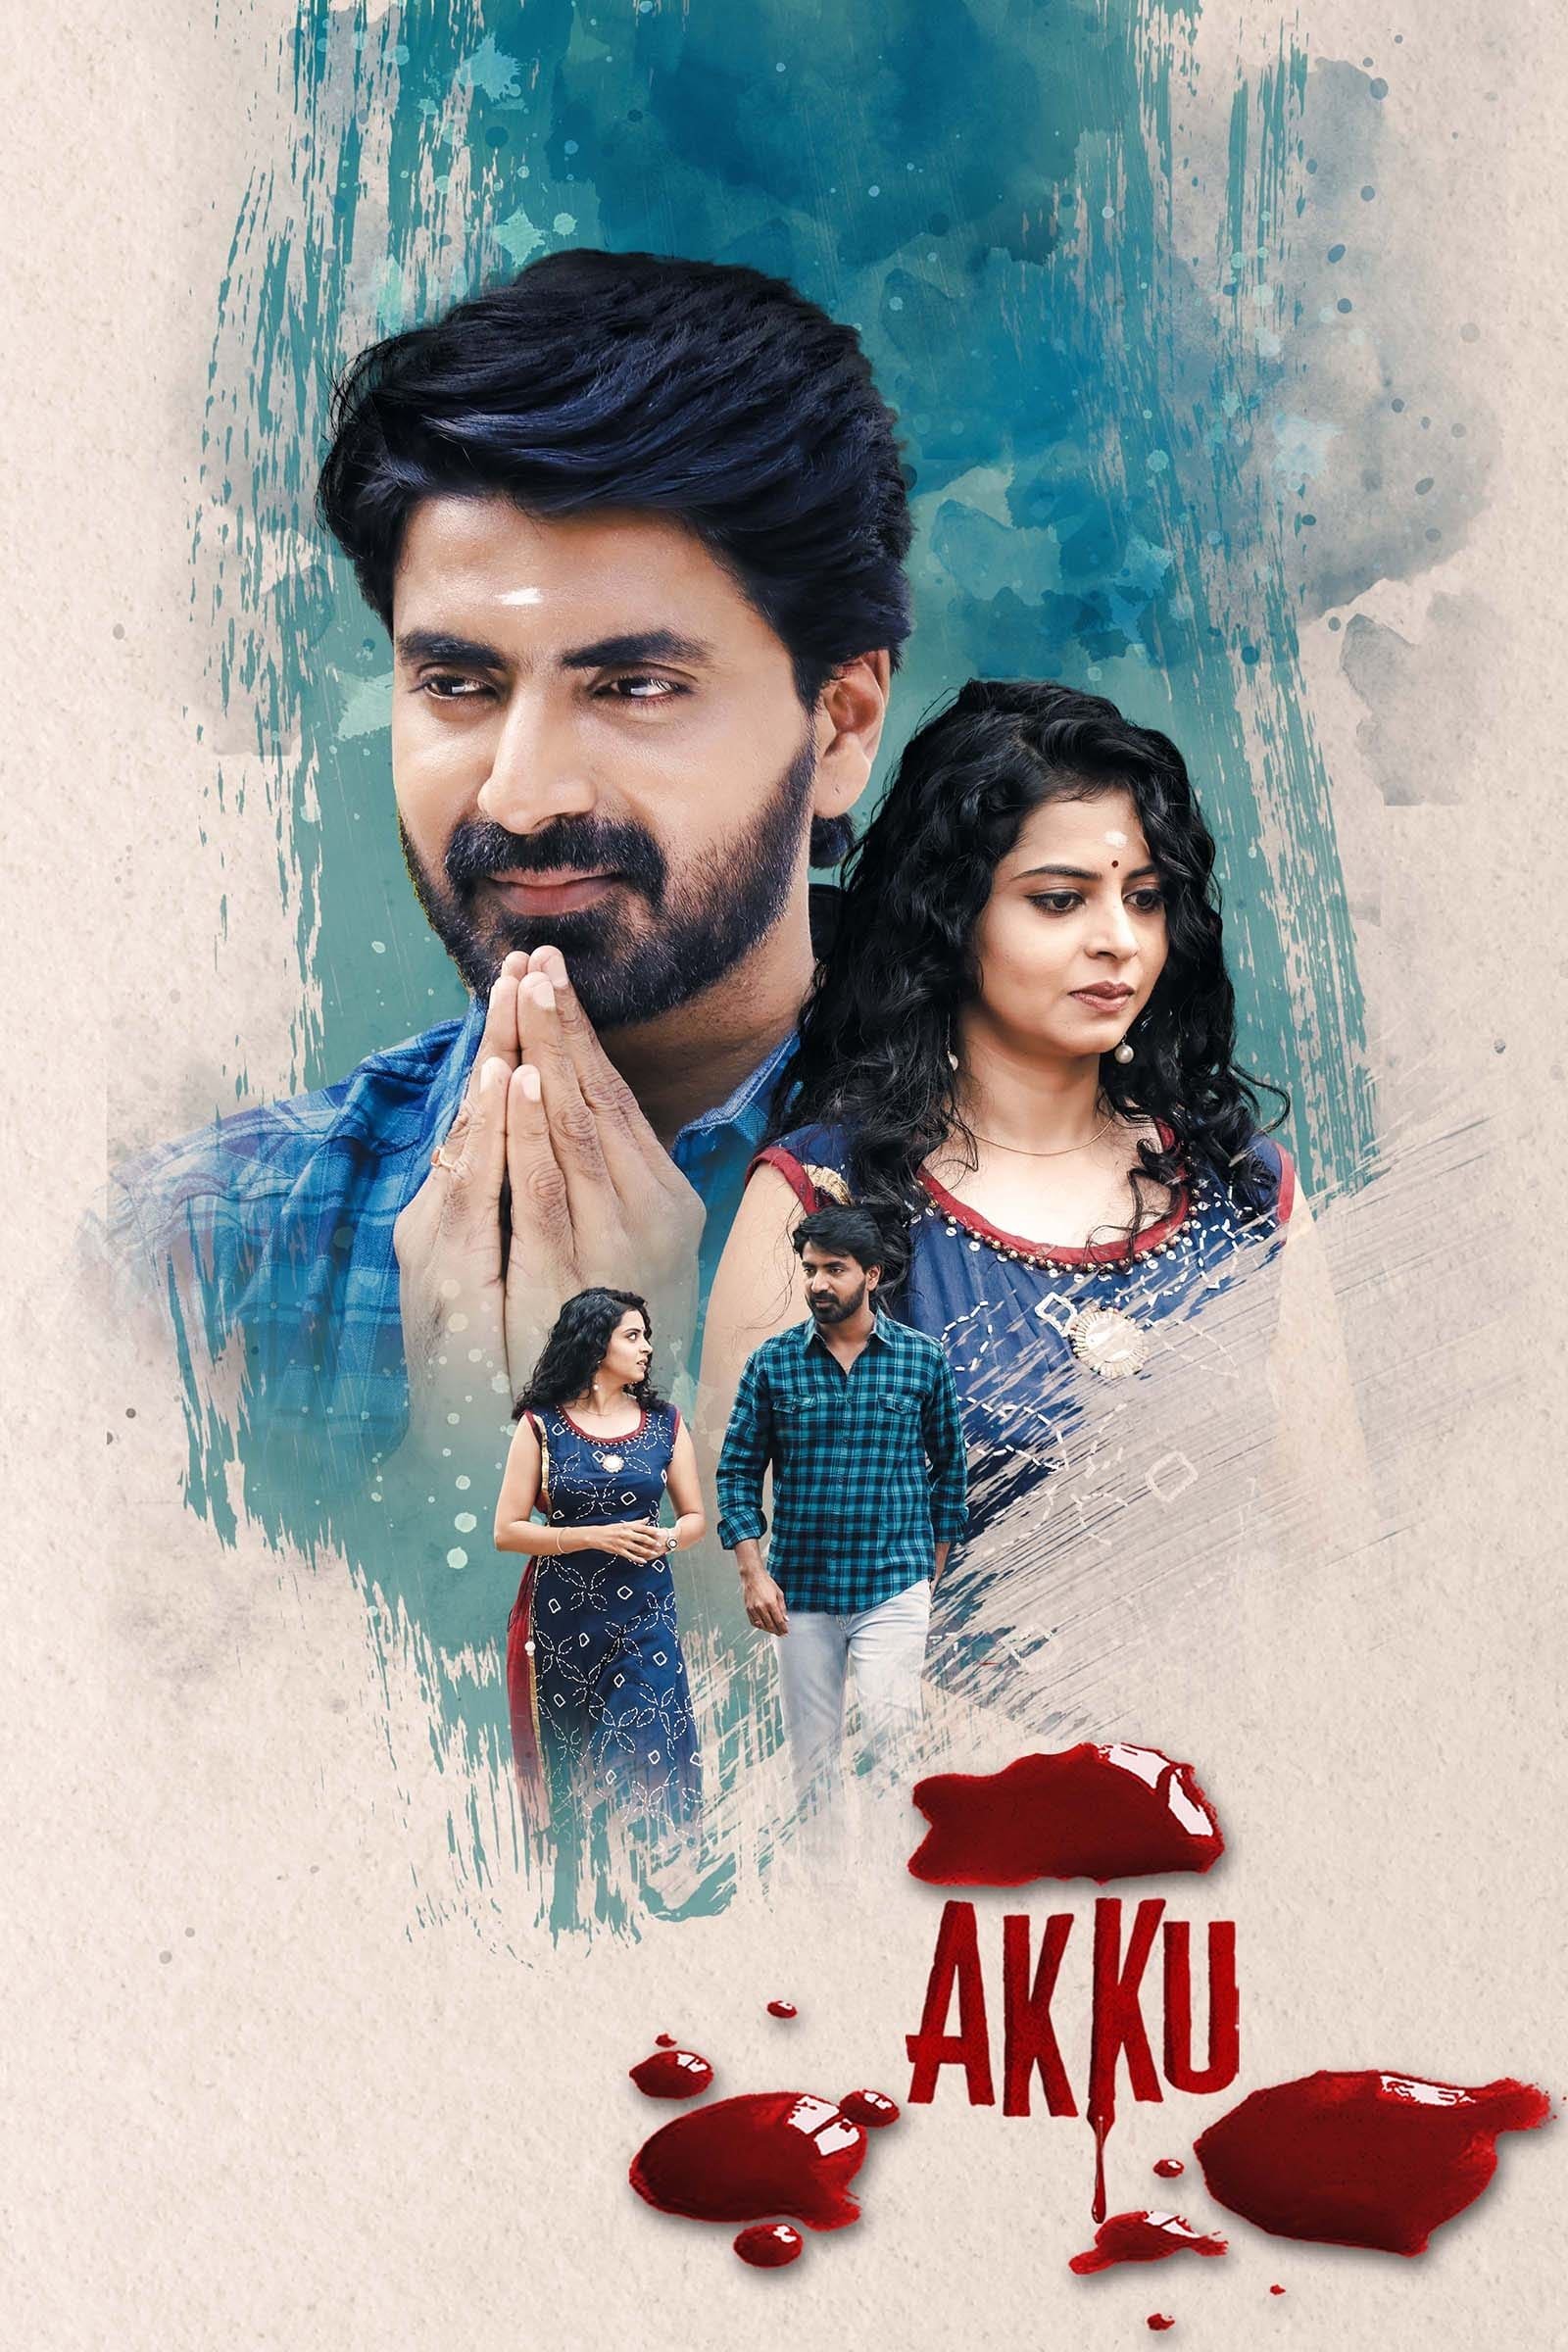 Poster for the movie "Akku"